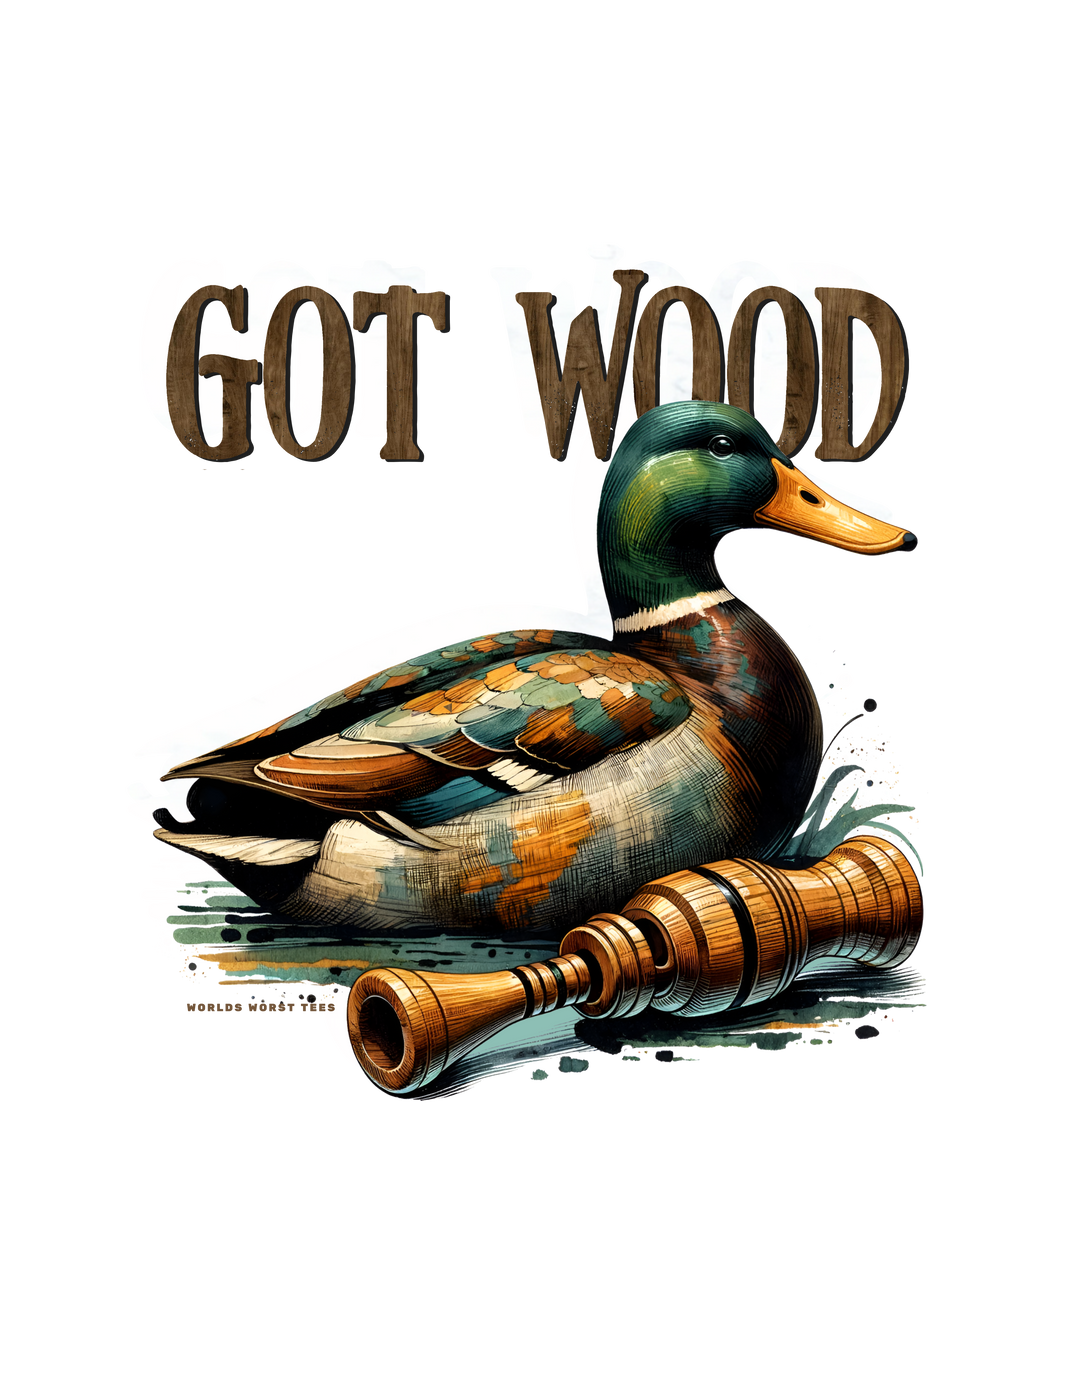 A relaxed fit Got Wood Tee in ring-spun cotton, featuring a duck with a wood mallet illustration. Medium weight, double-needle stitching, and tubular shape for durability and comfort. From Worlds Worst Tees.